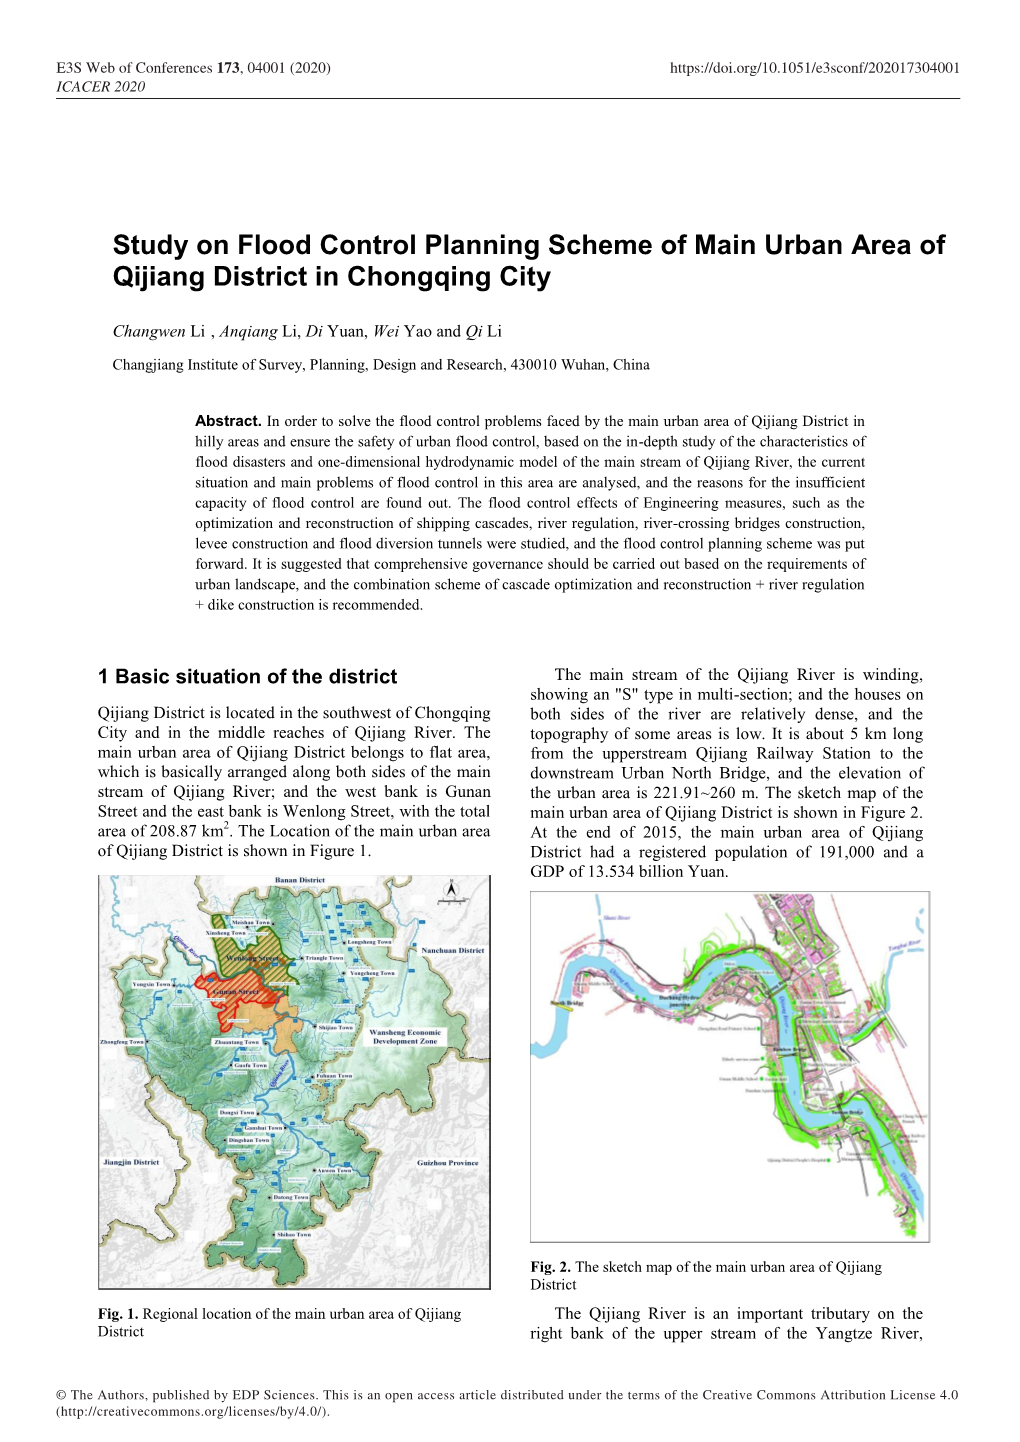 Study on Flood Control Planning Scheme of Main Urban Area of Qijiang District in Chongqing City